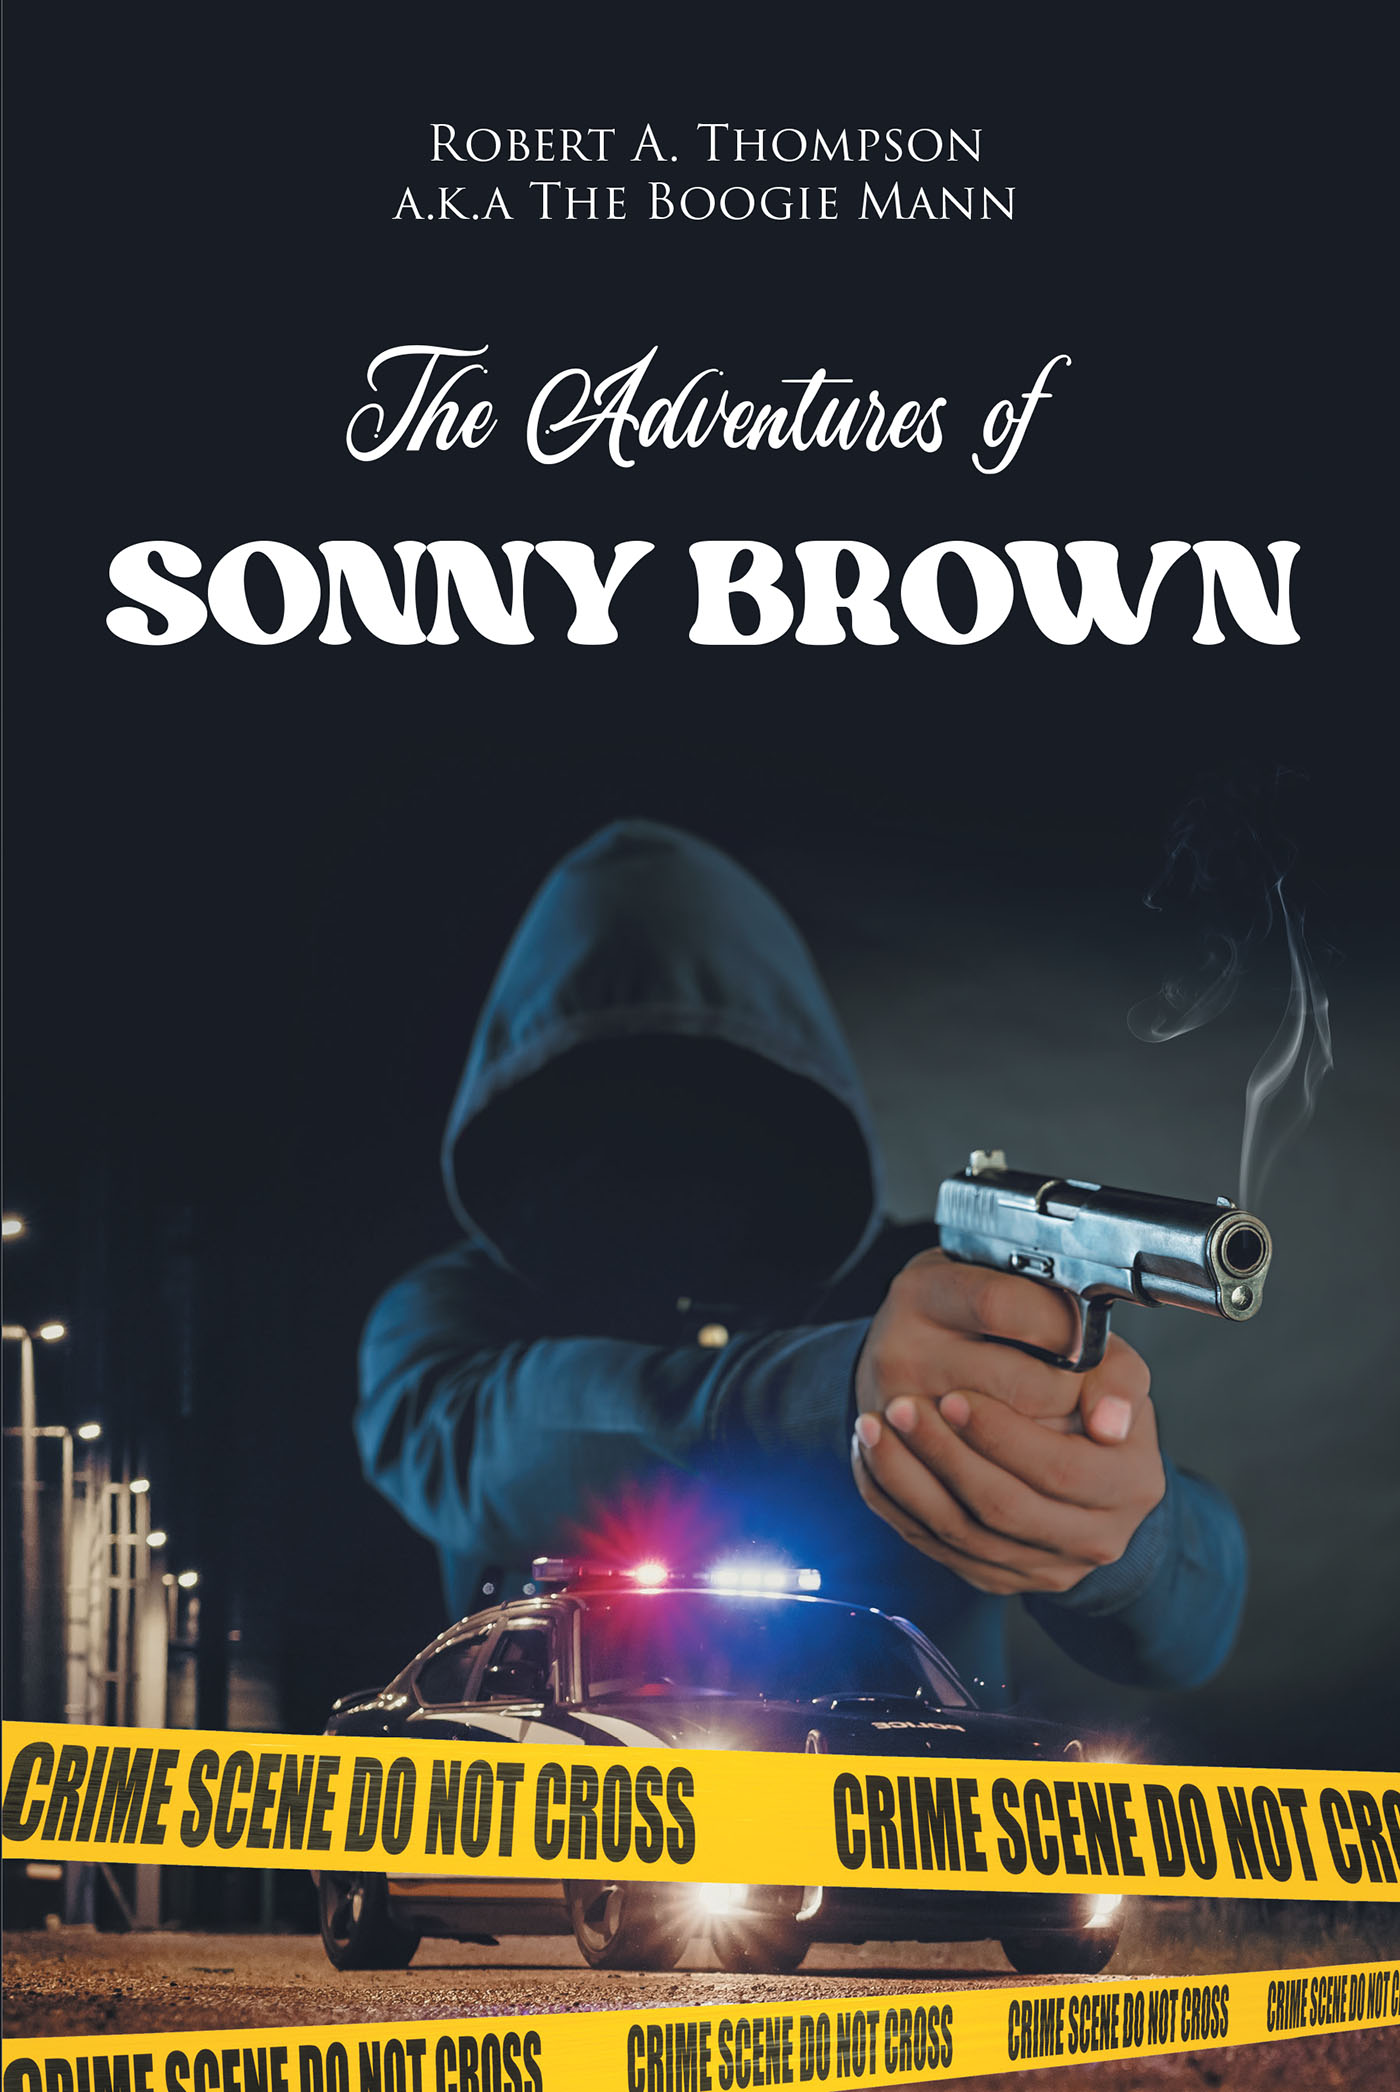 Author Robert A. Thompson a.k.a The Boogie Mann’s New Book “The Adventures of Sonny Brown” is a Thrilling Story That Reveals the Dangers and Truth Behind a Life of Crime